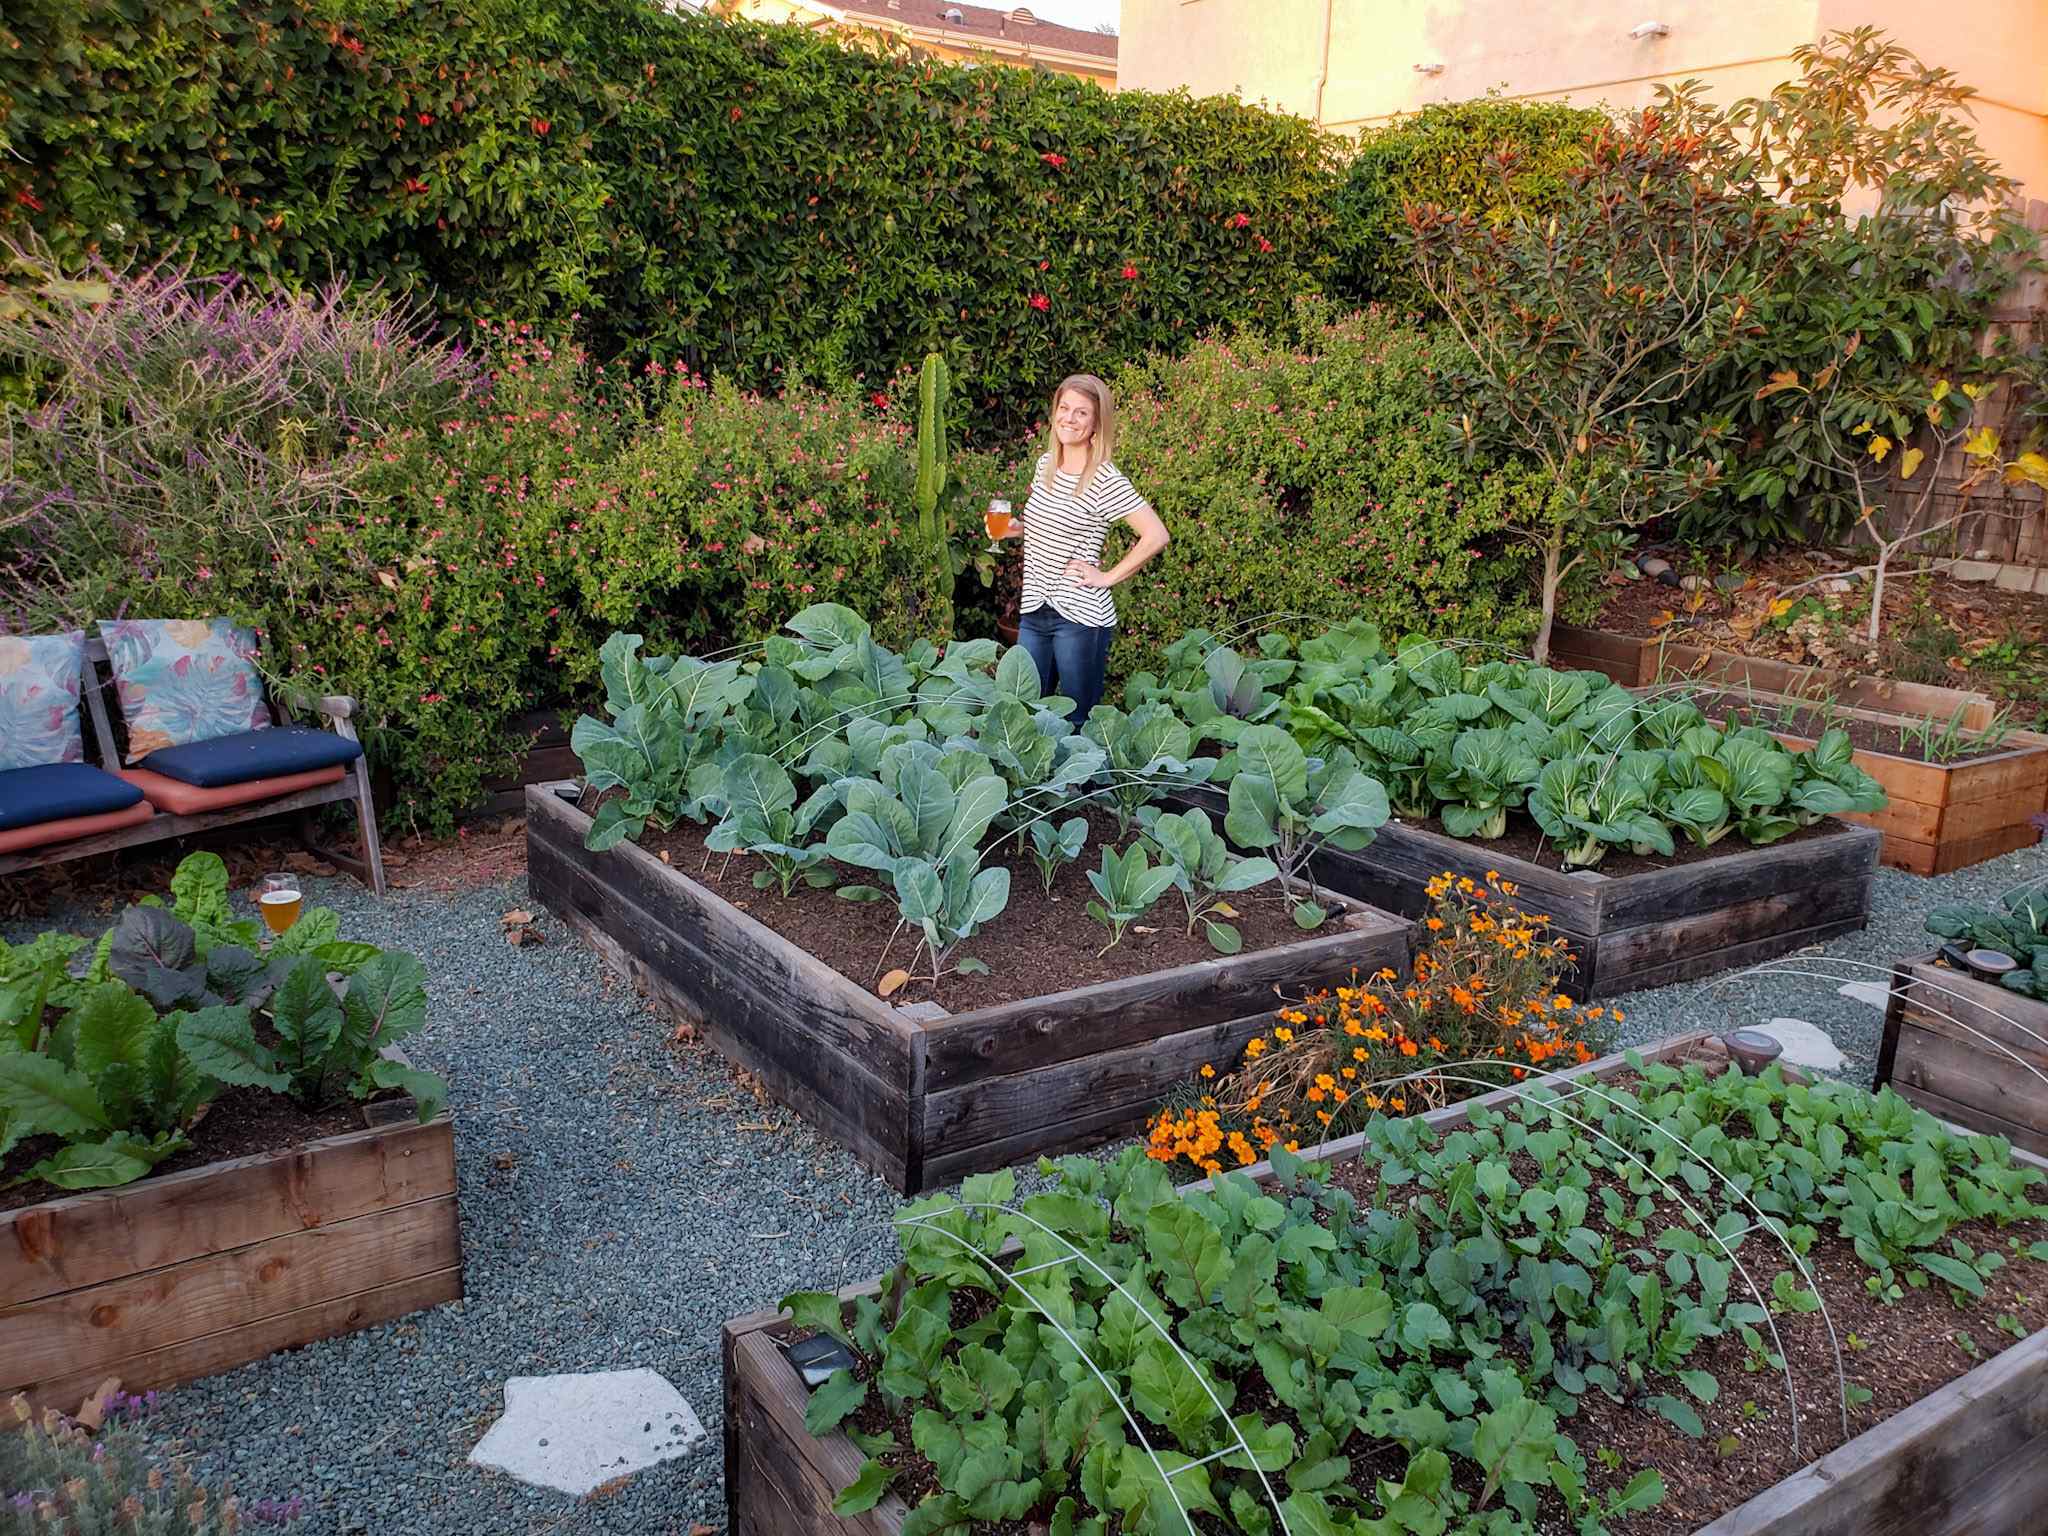 A front yard garden with 6 raised wood garden beds of various sizes. The ground is covered in small blue-green gravel, with stepping stone pathways between the beds. Flowers, shrubs, vines, and potted plants surround the perimeter of the raised bed area. A woman (Deanna) is standing in between the raised garden beds with a beer in her hand.